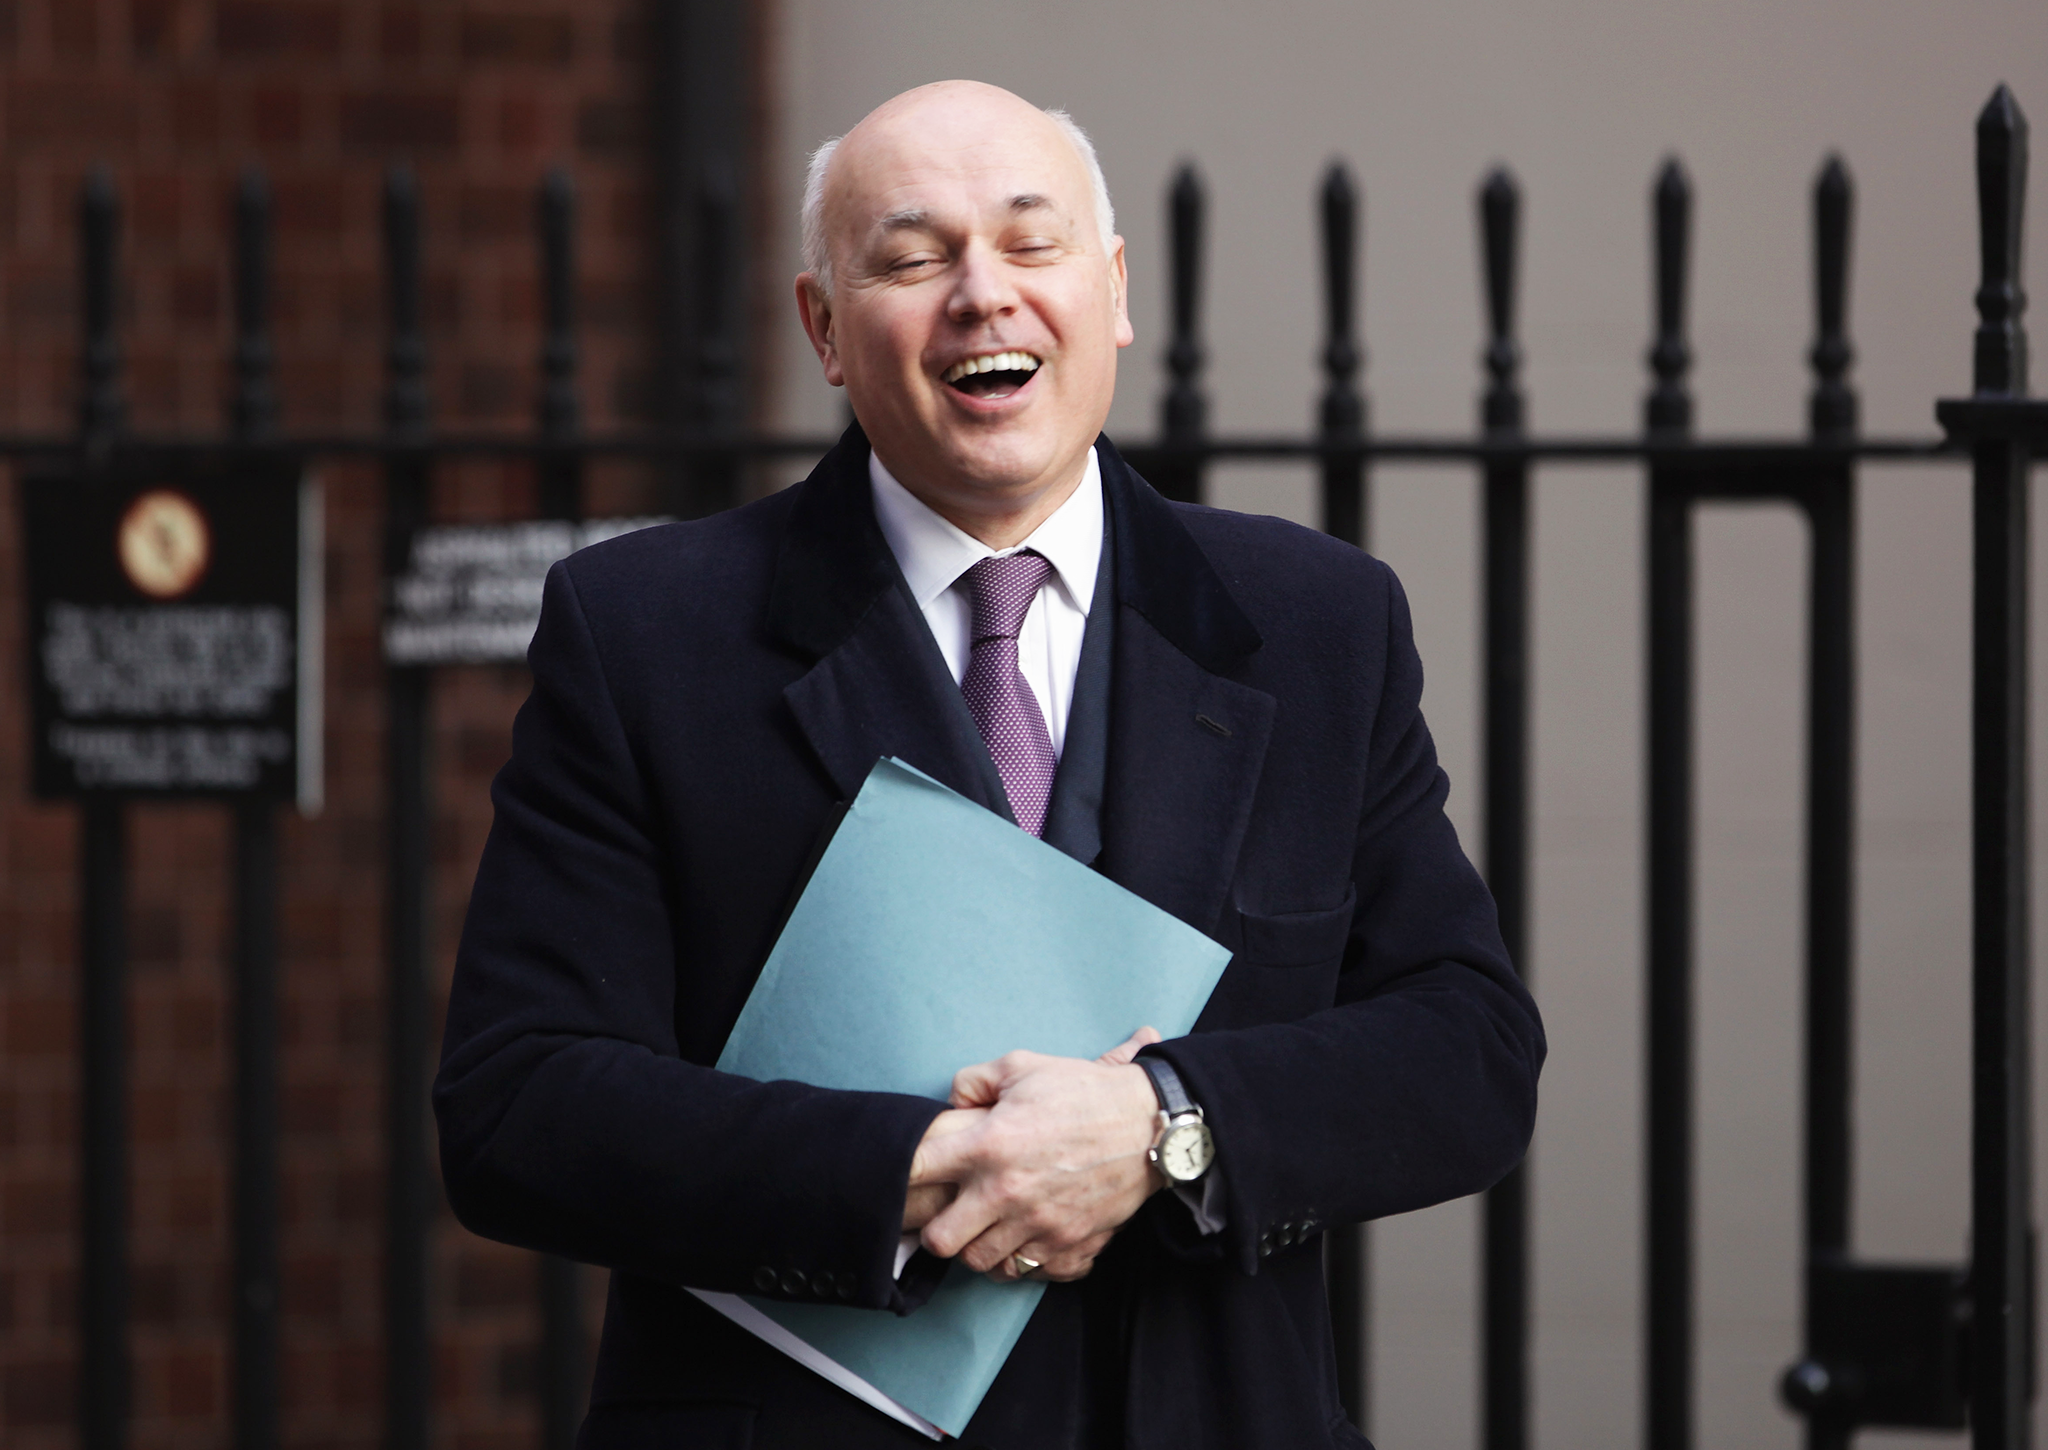 Work and Pensions Secretary Iain Duncan Smith said the figures demonstrated the government's efforts to tackling poverty were having an impact